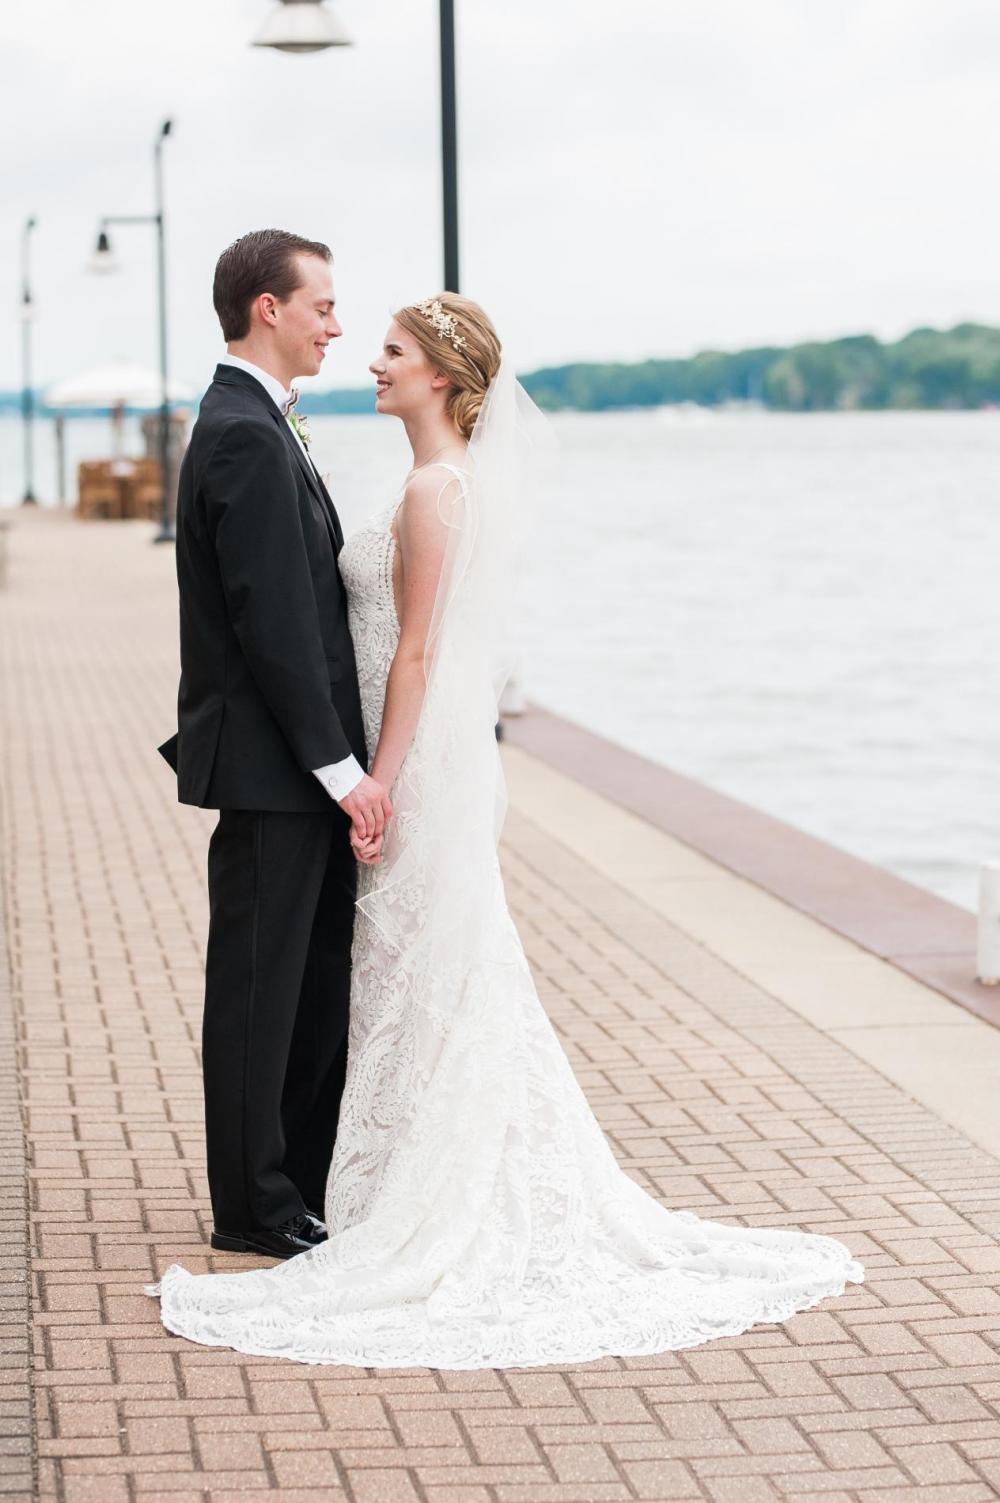 A Romantic Waterfront Wedding in Holland: The Real Wedding of Emily and ...